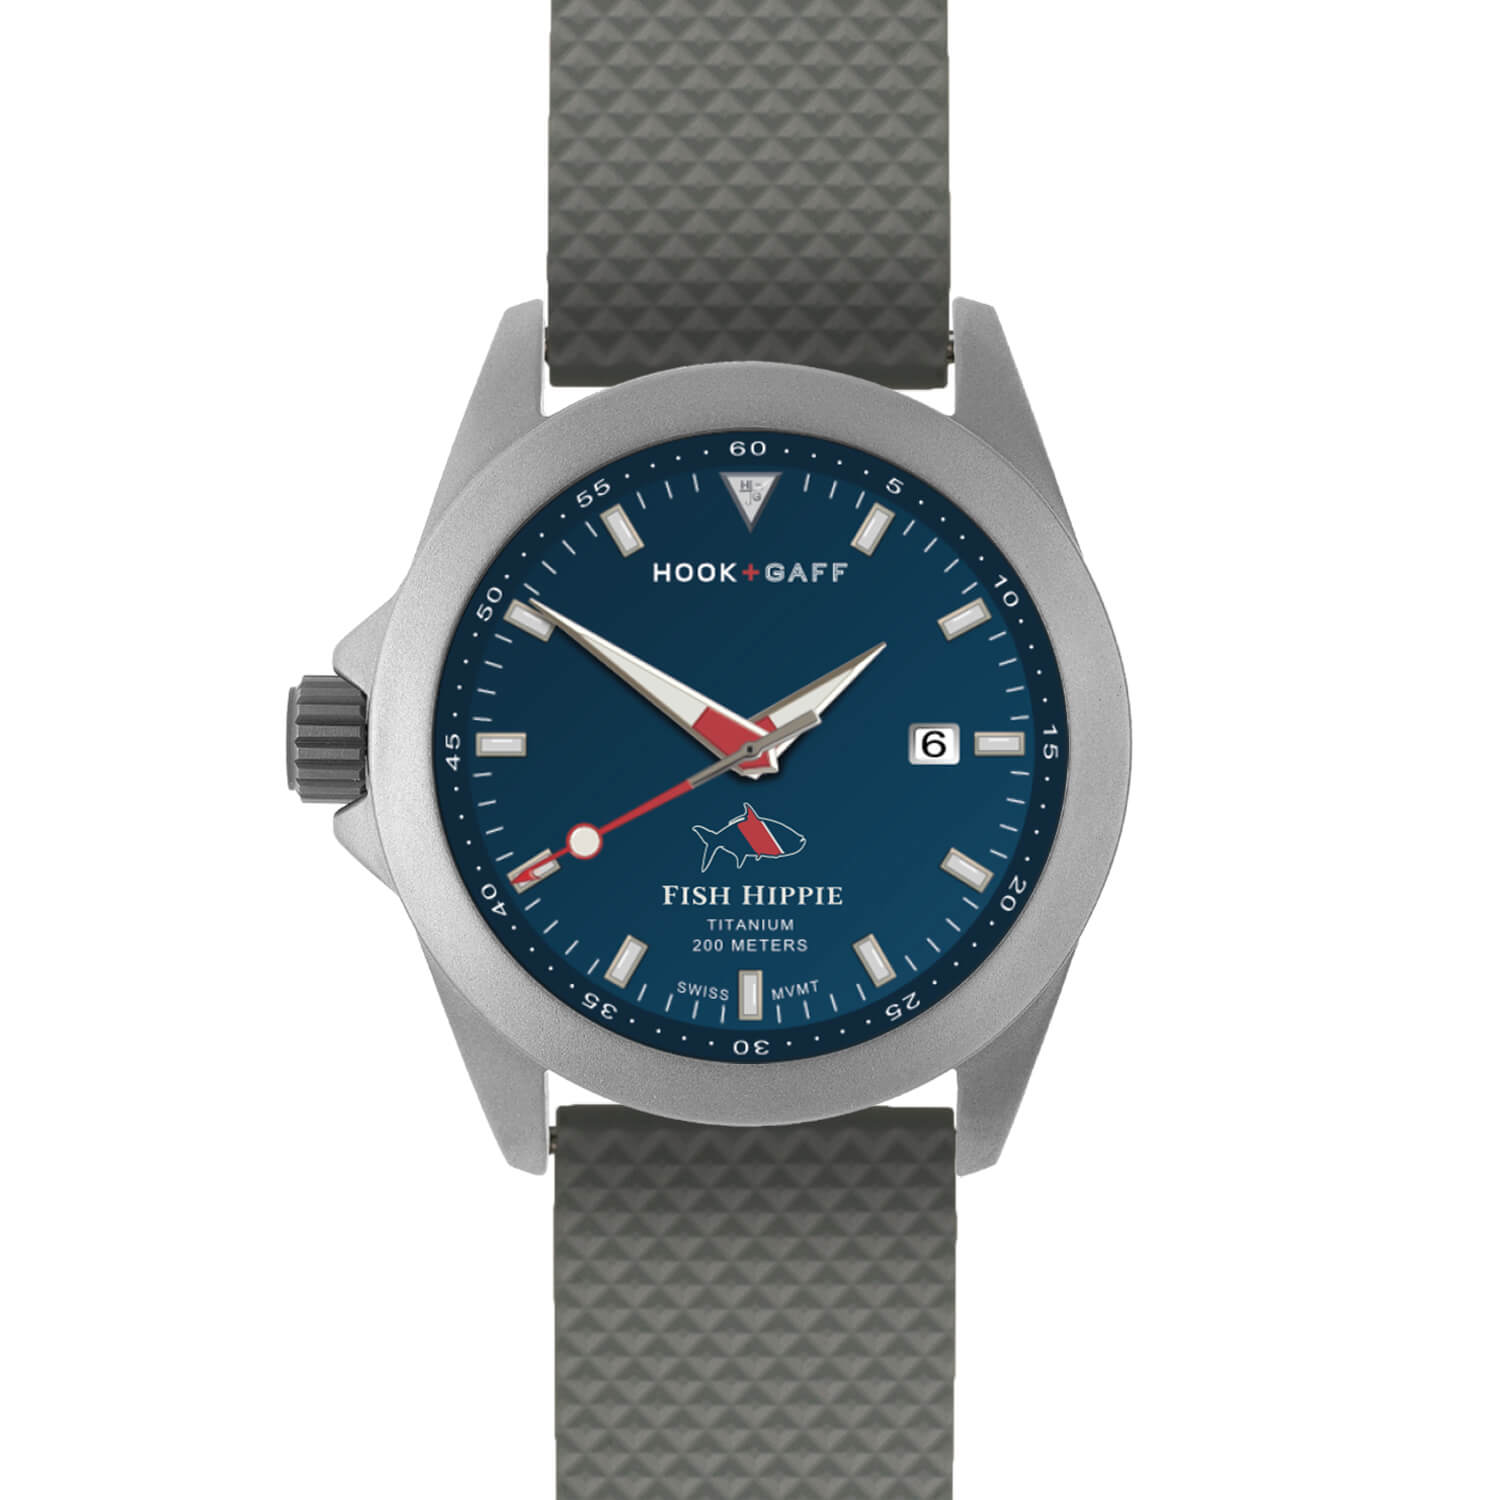 Fish Hippie FH Edition Hook+Gaff Sportfisher Watch - Navy Dial Gray Dive Strap / Os